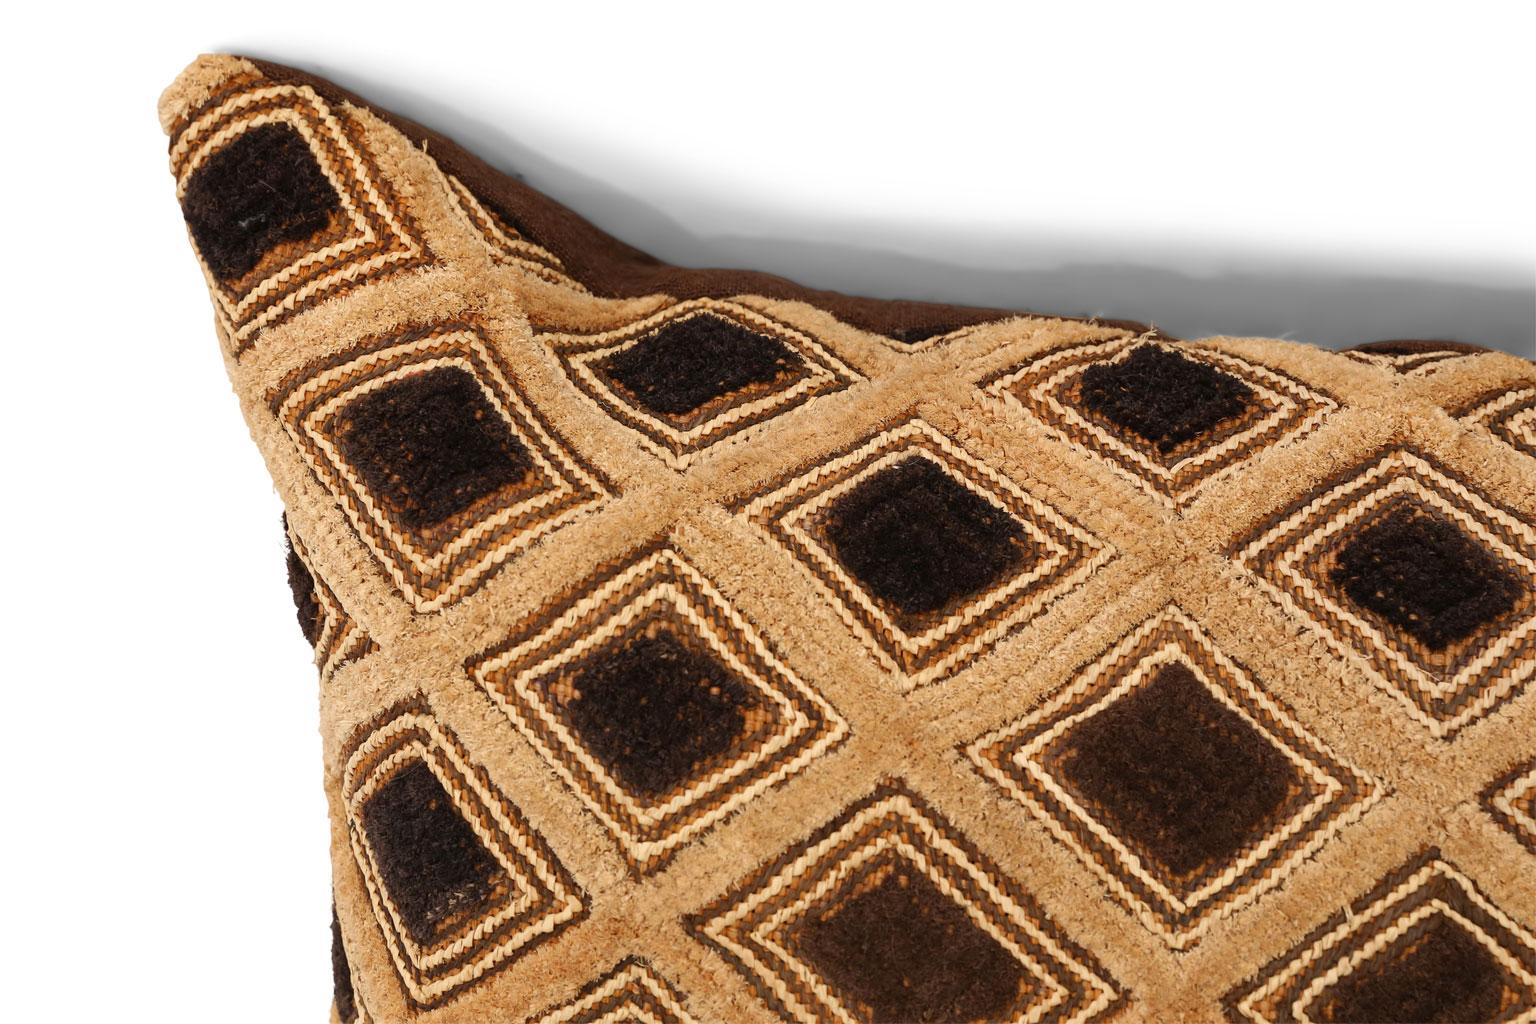 Large Kuba cloth cushion: face is made from vintage Kuba cloth (raphia palm with cut pile to resemble velvet). Backed by hand-dyed vintage hemp. Includes zip fastener and feather insert. Compliments a second Kuba cloth cushion in our inventory (item